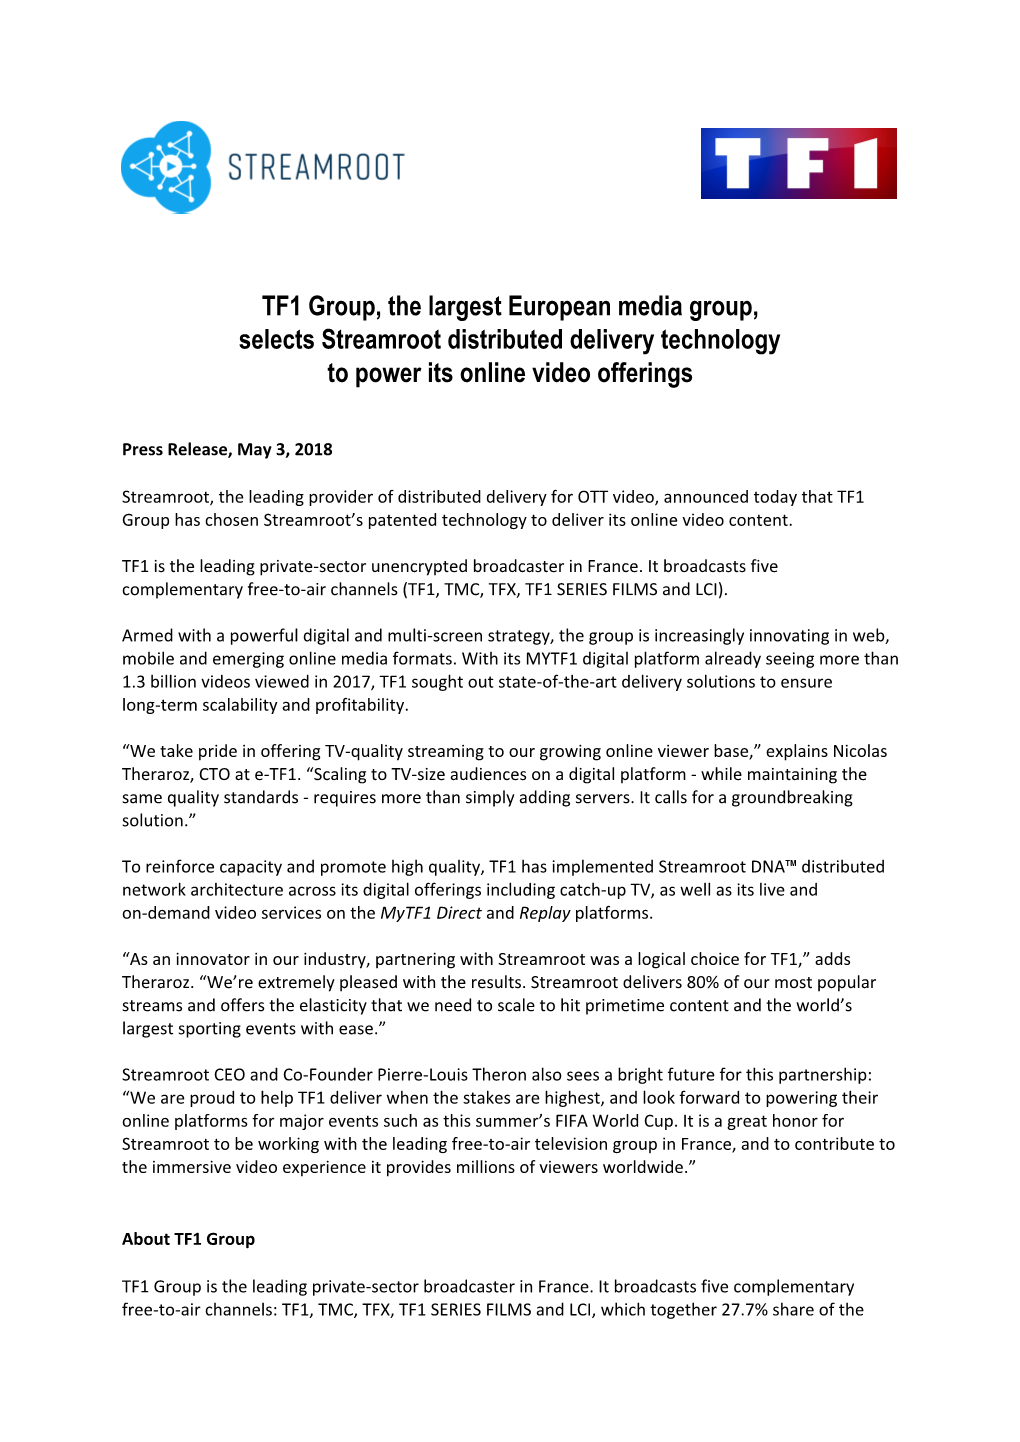 TF1 Group, the Largest European Media Group, Selects Streamroot Distributed Delivery Technology to Power Its Online Video Offerings